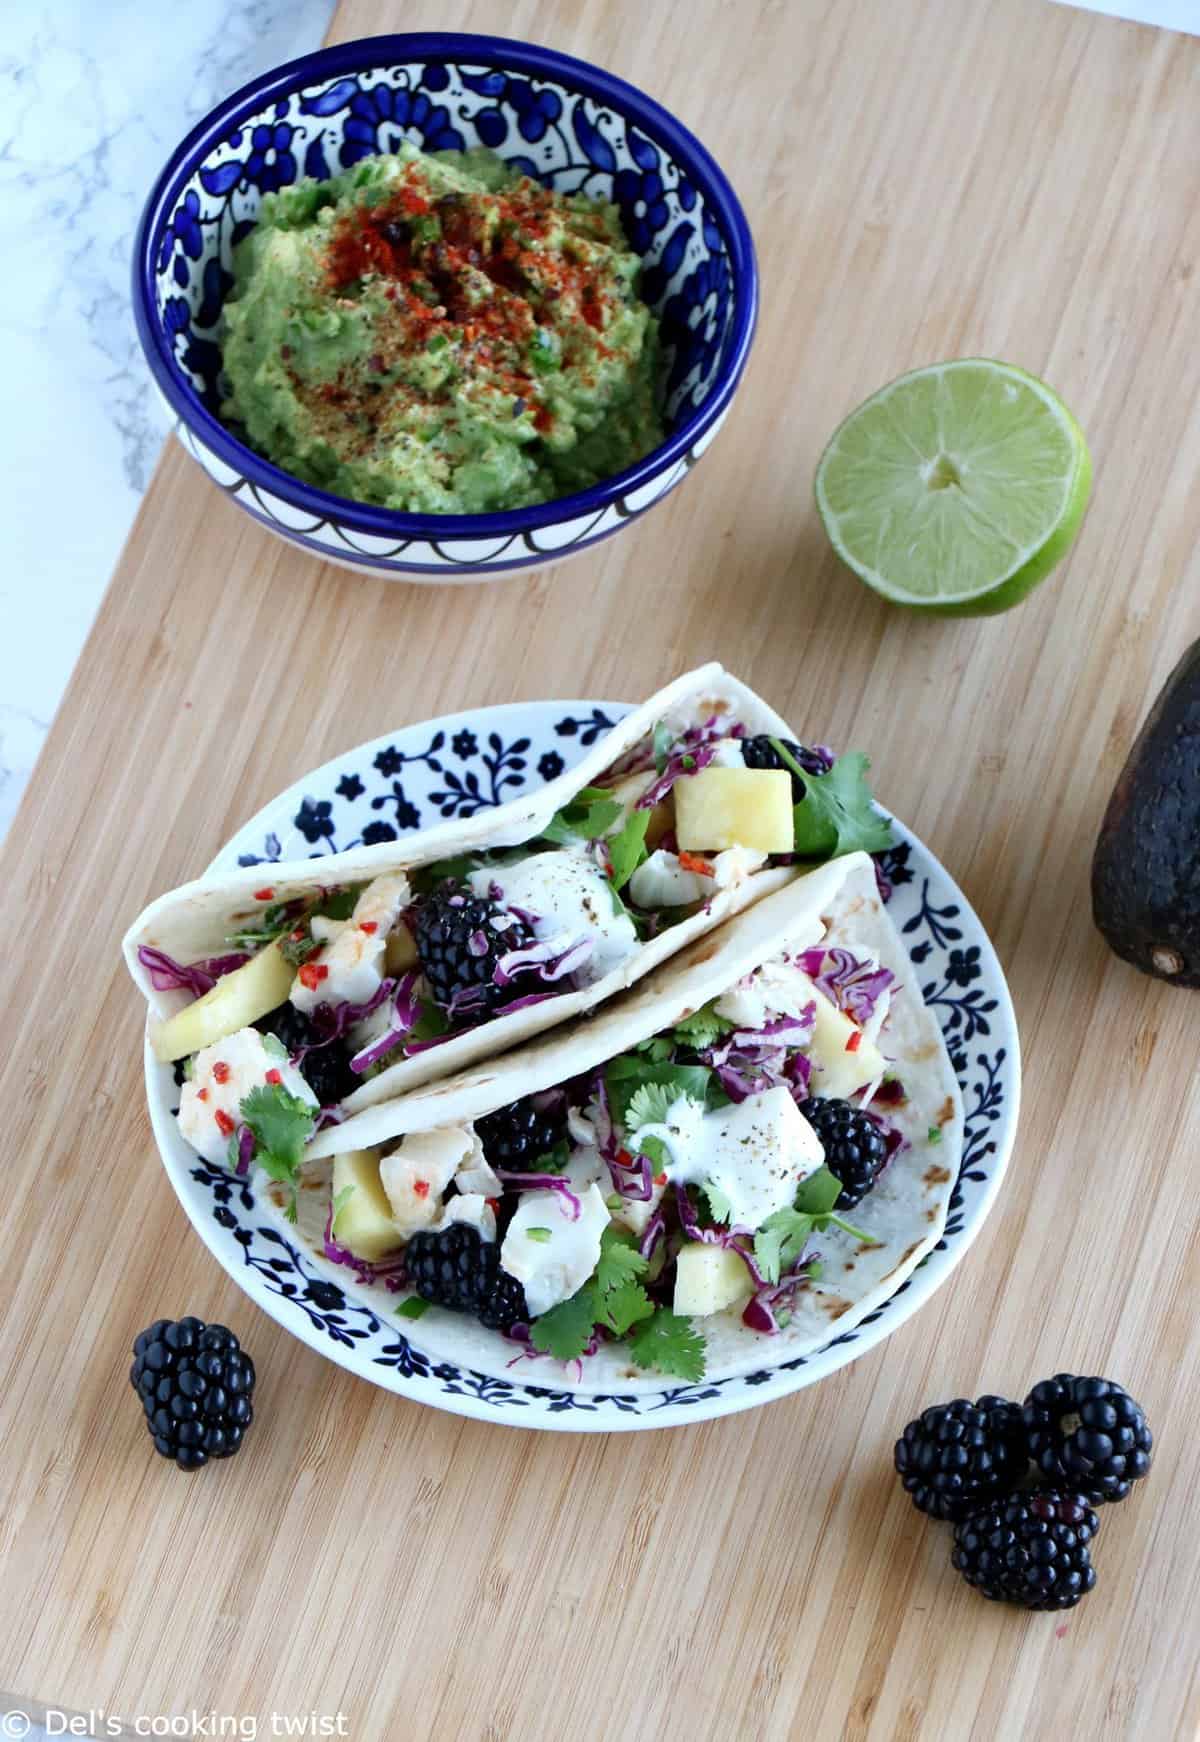 Fish Tacos with a Lime Chili Fruit Salsa